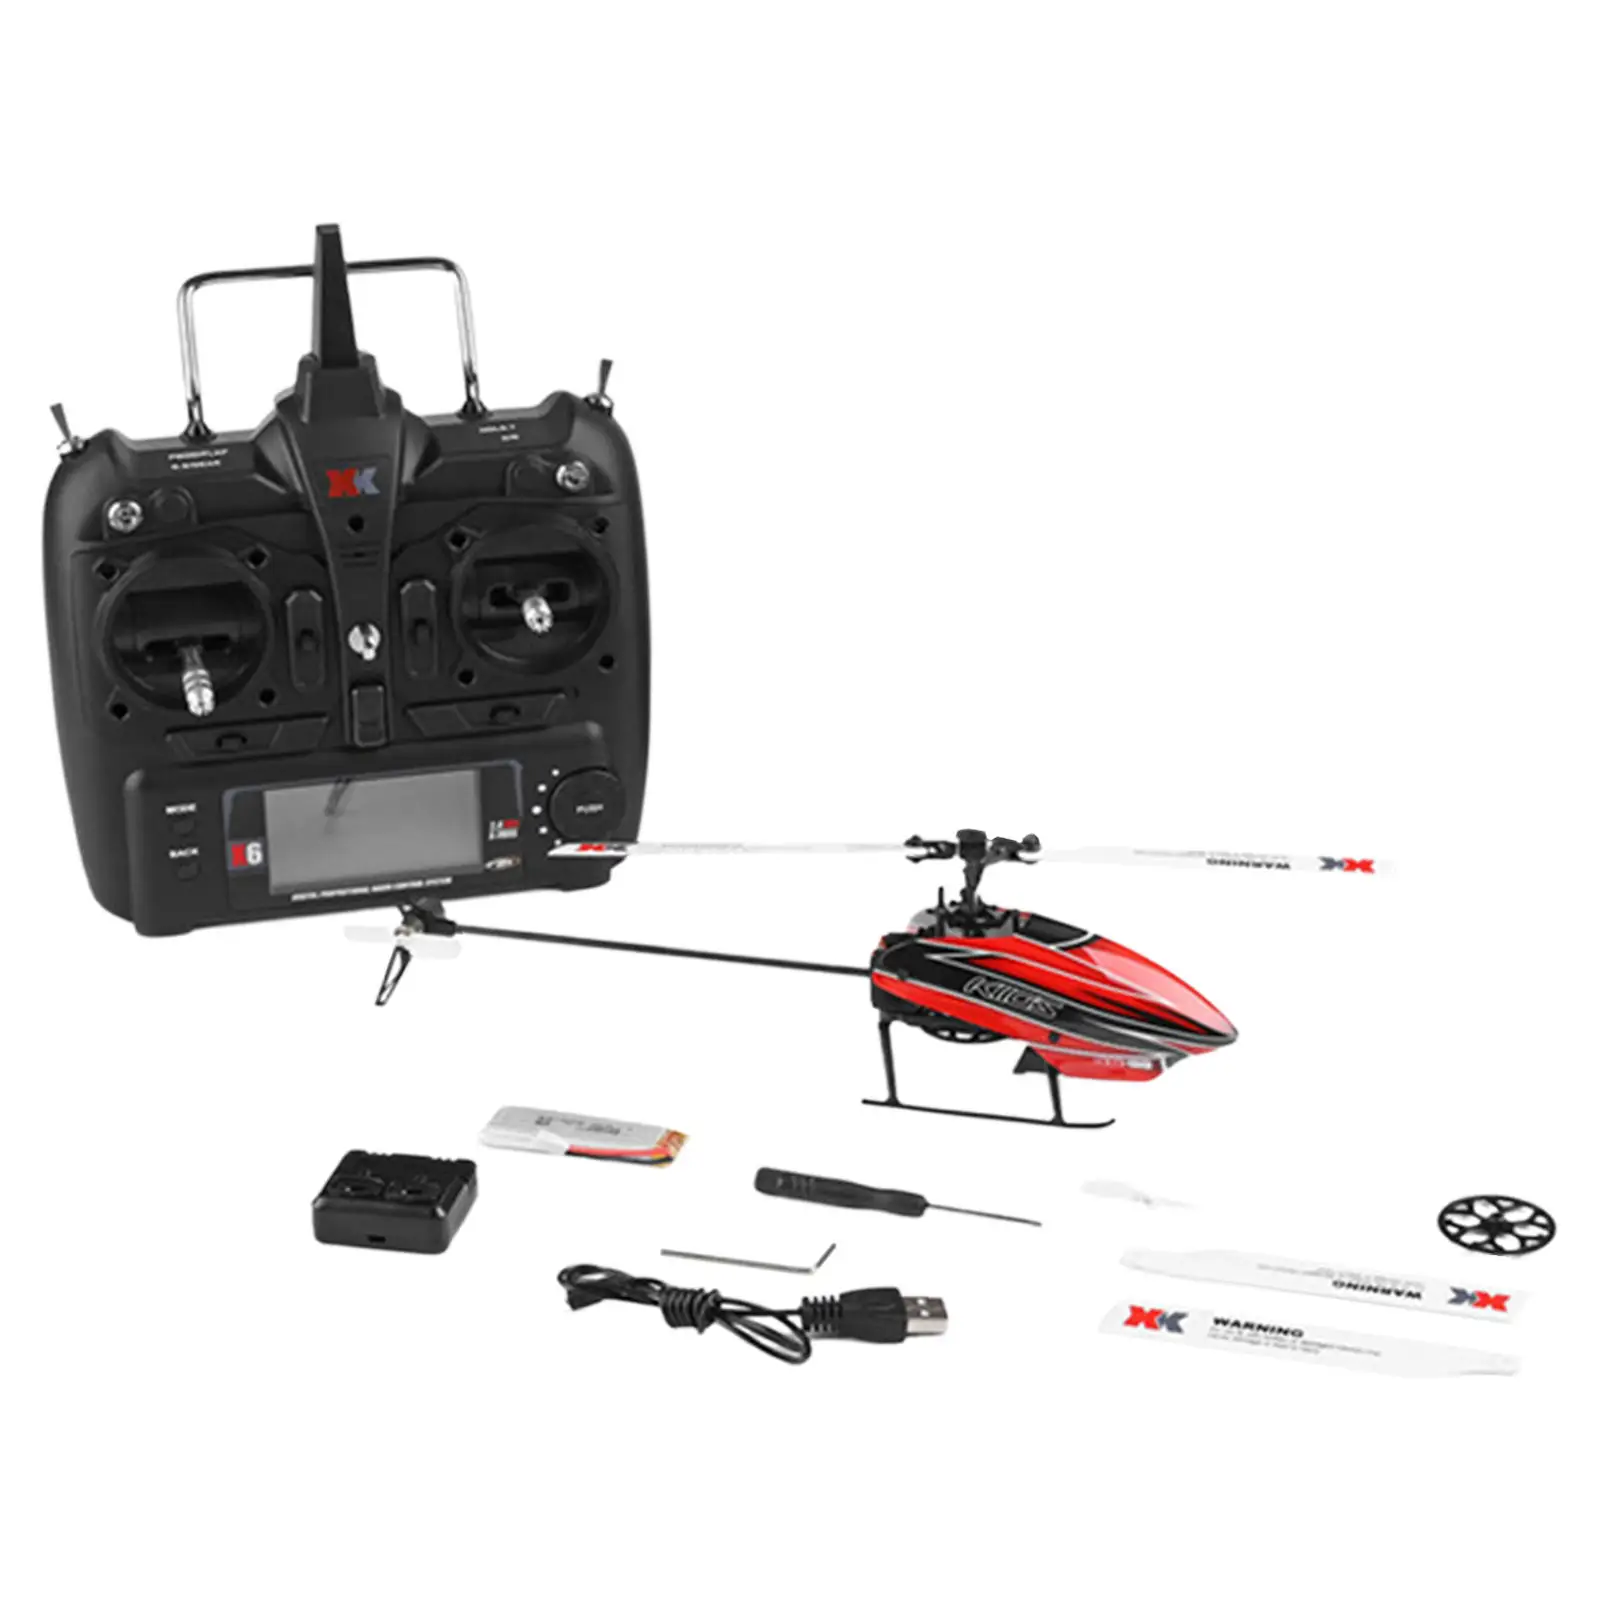 XK K110S Remote Control Helicopter with Gyro Brushless Motor 6G System 2.4G RC Airplane for Outdoor Beginners Kids Girls Boys